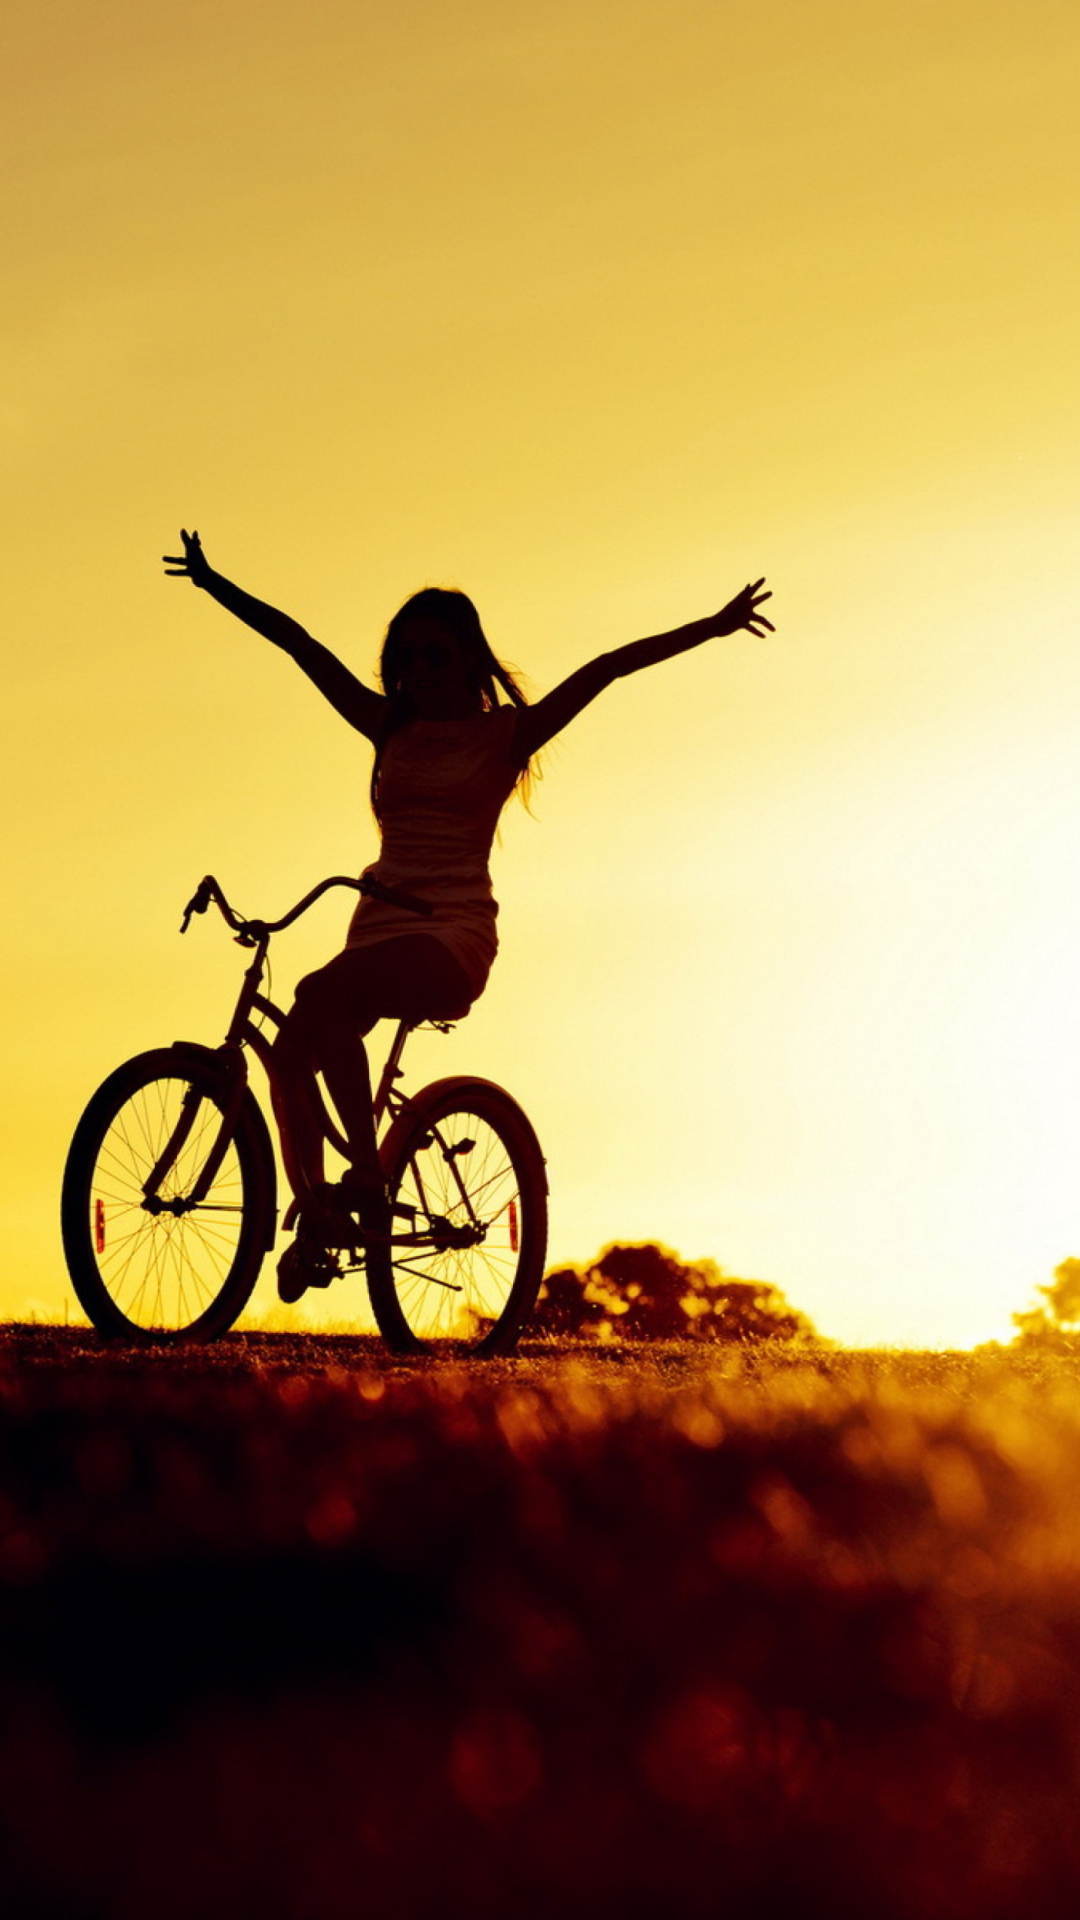 Bicycle Ride At Golden Sunset wallpaper 1080x1920